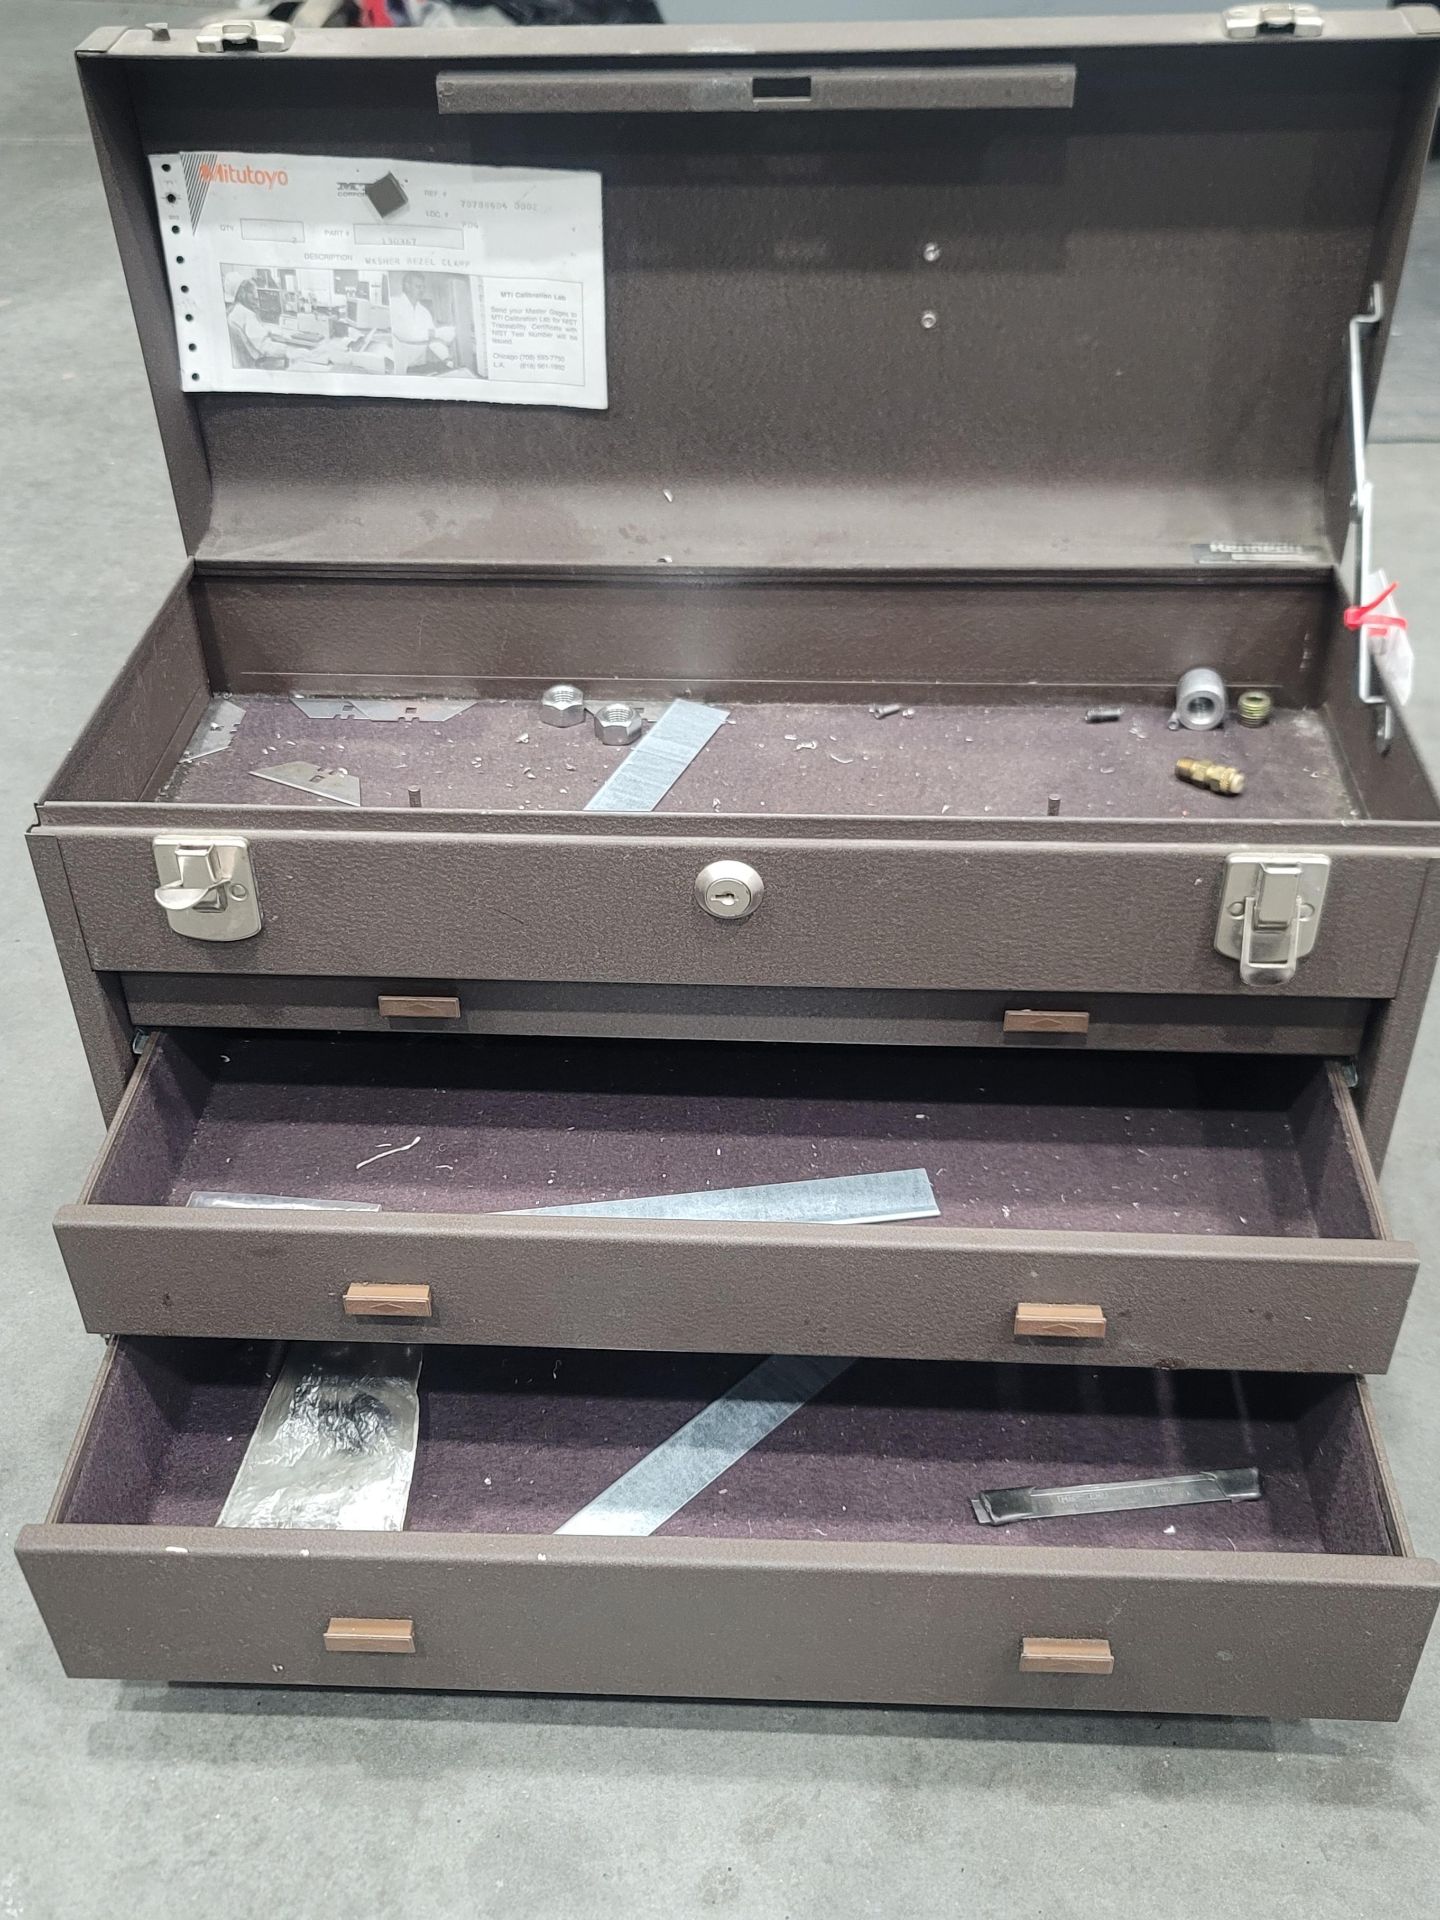 KENNEDY 3-DRAWER TOOL BOX, MODEL 620-517179 - Image 2 of 3